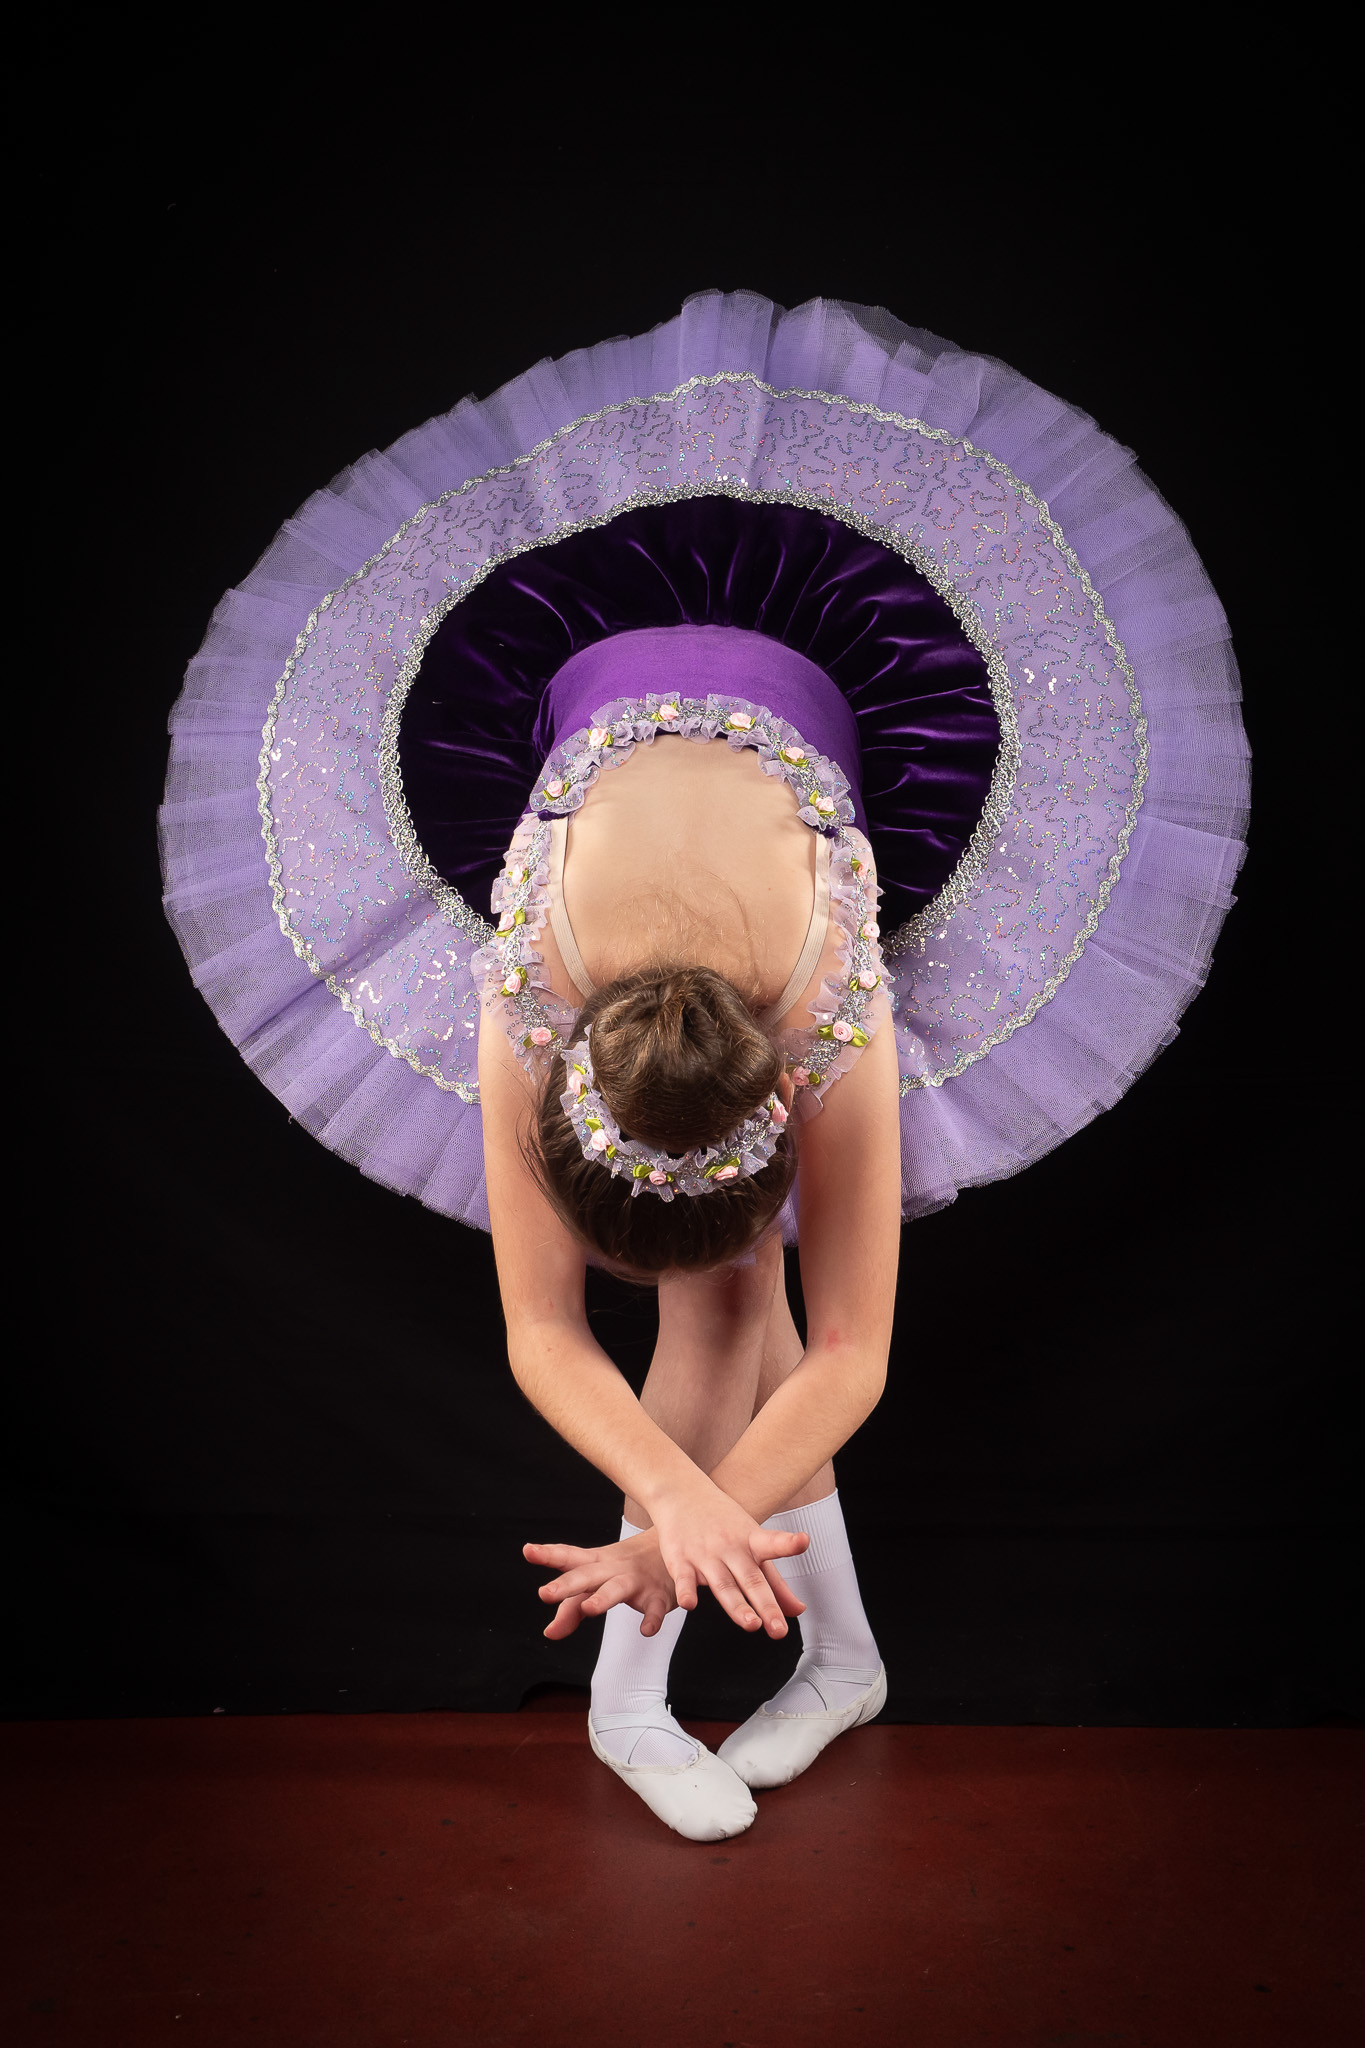 Stand out in the dance world with a stunning portfolio by Helen Rose Photography. Elevate your image and showcase your skills.